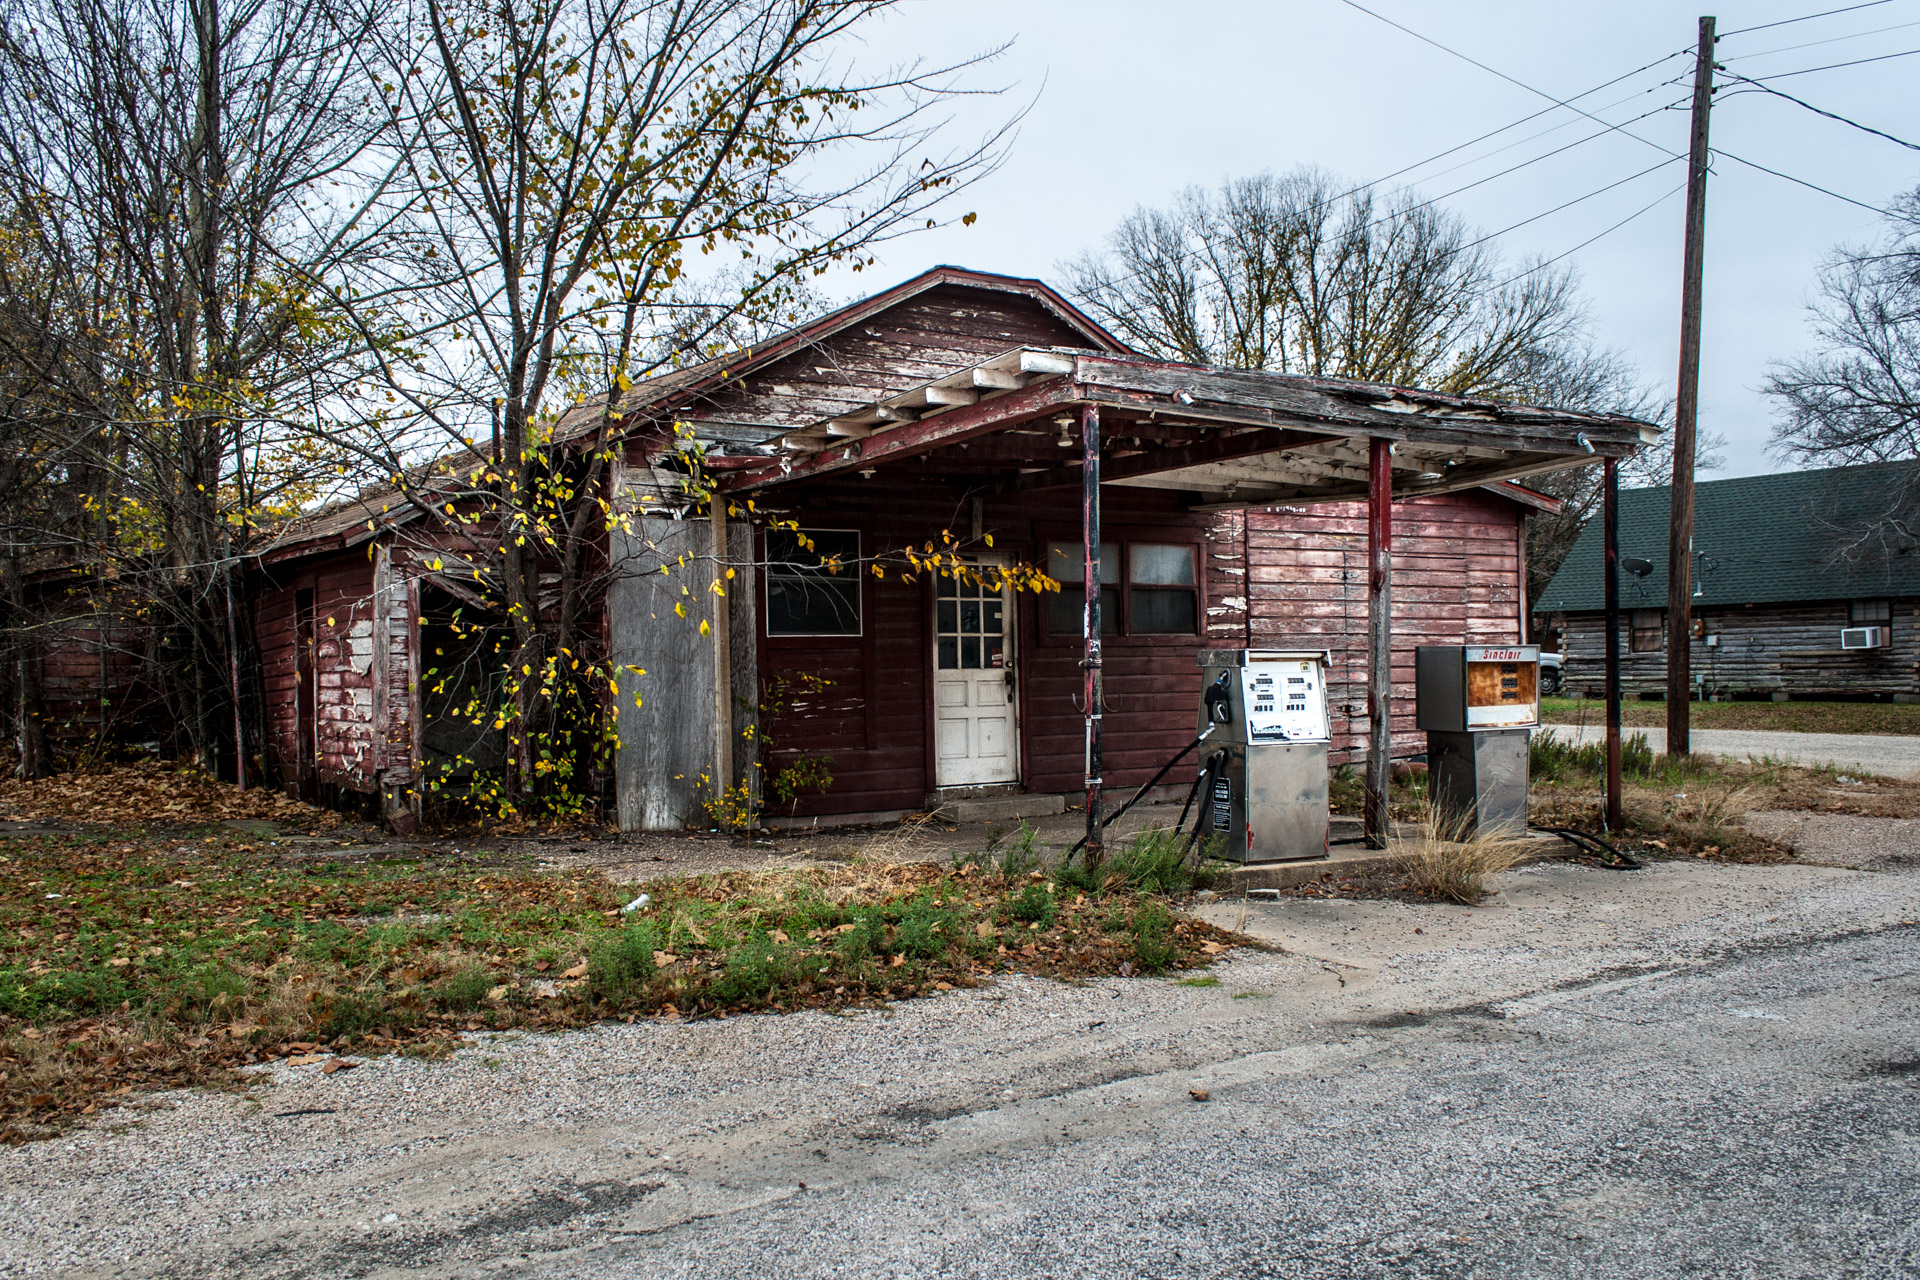 Kosse, Texas - Old Gas Pumps Gas Station